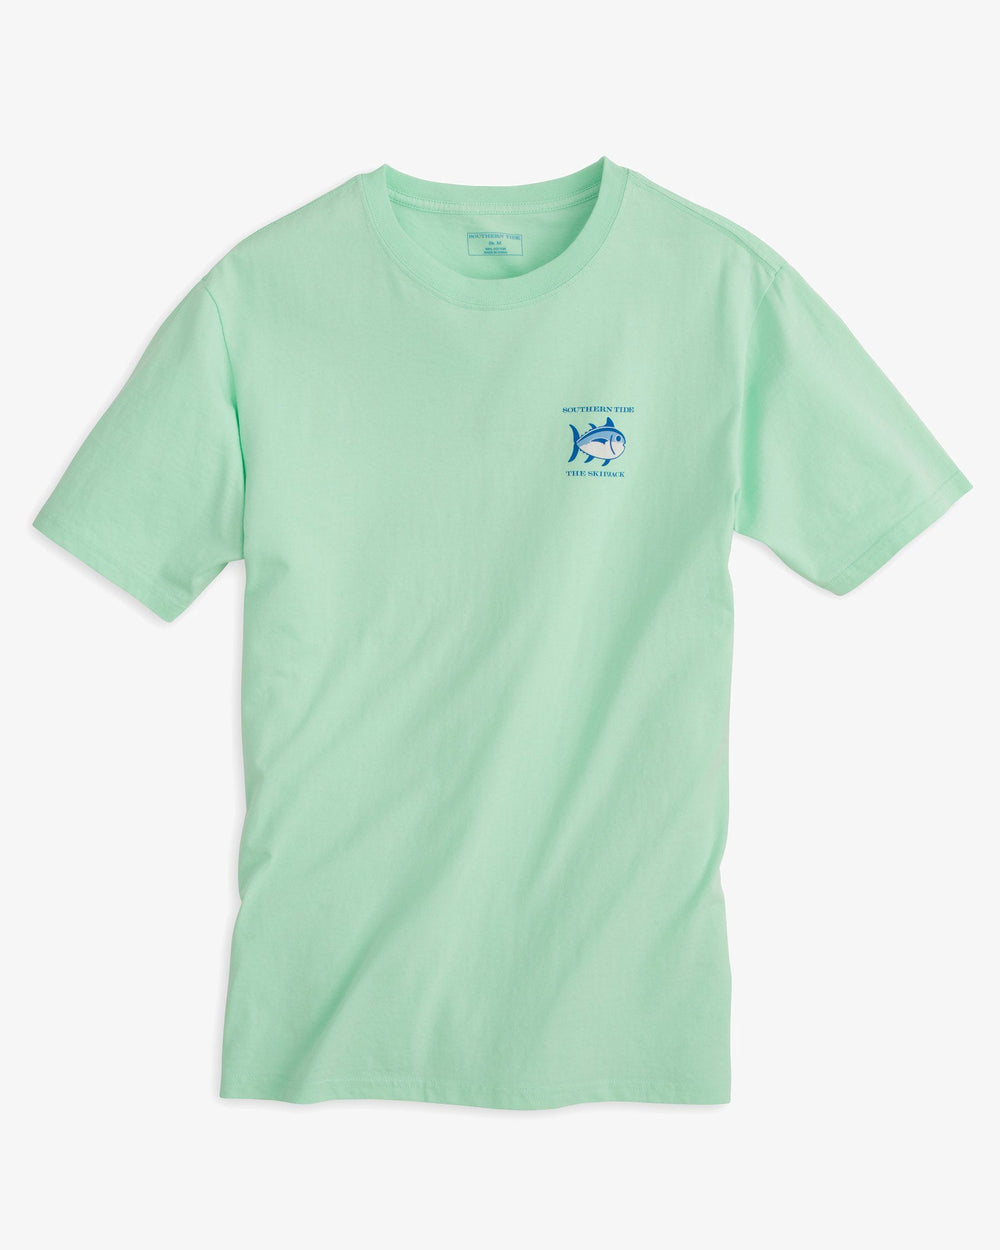 The front view of the Men's Green Original Skipjack Short Sleeve T-Shirt by Southern Tide - Offshore Green